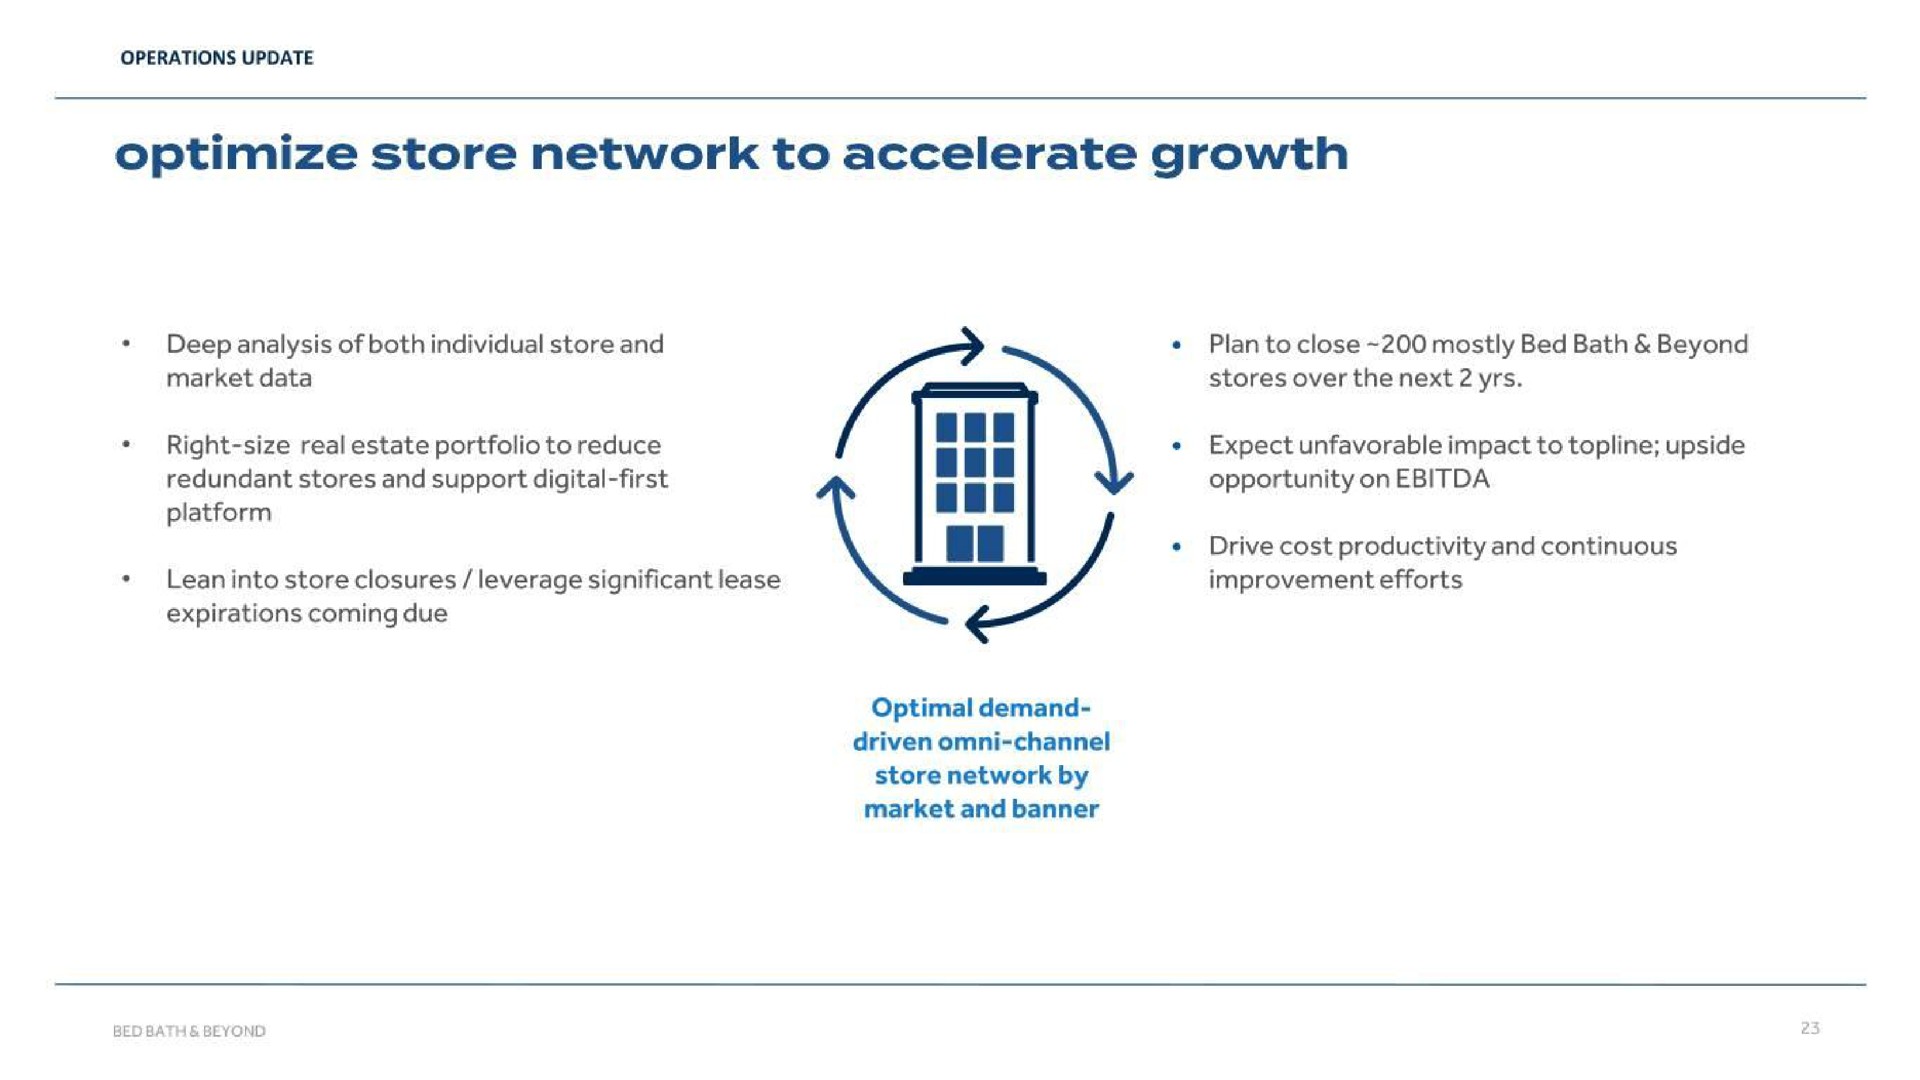 optimize store network to accelerate growth | Bed Bath & Beyond